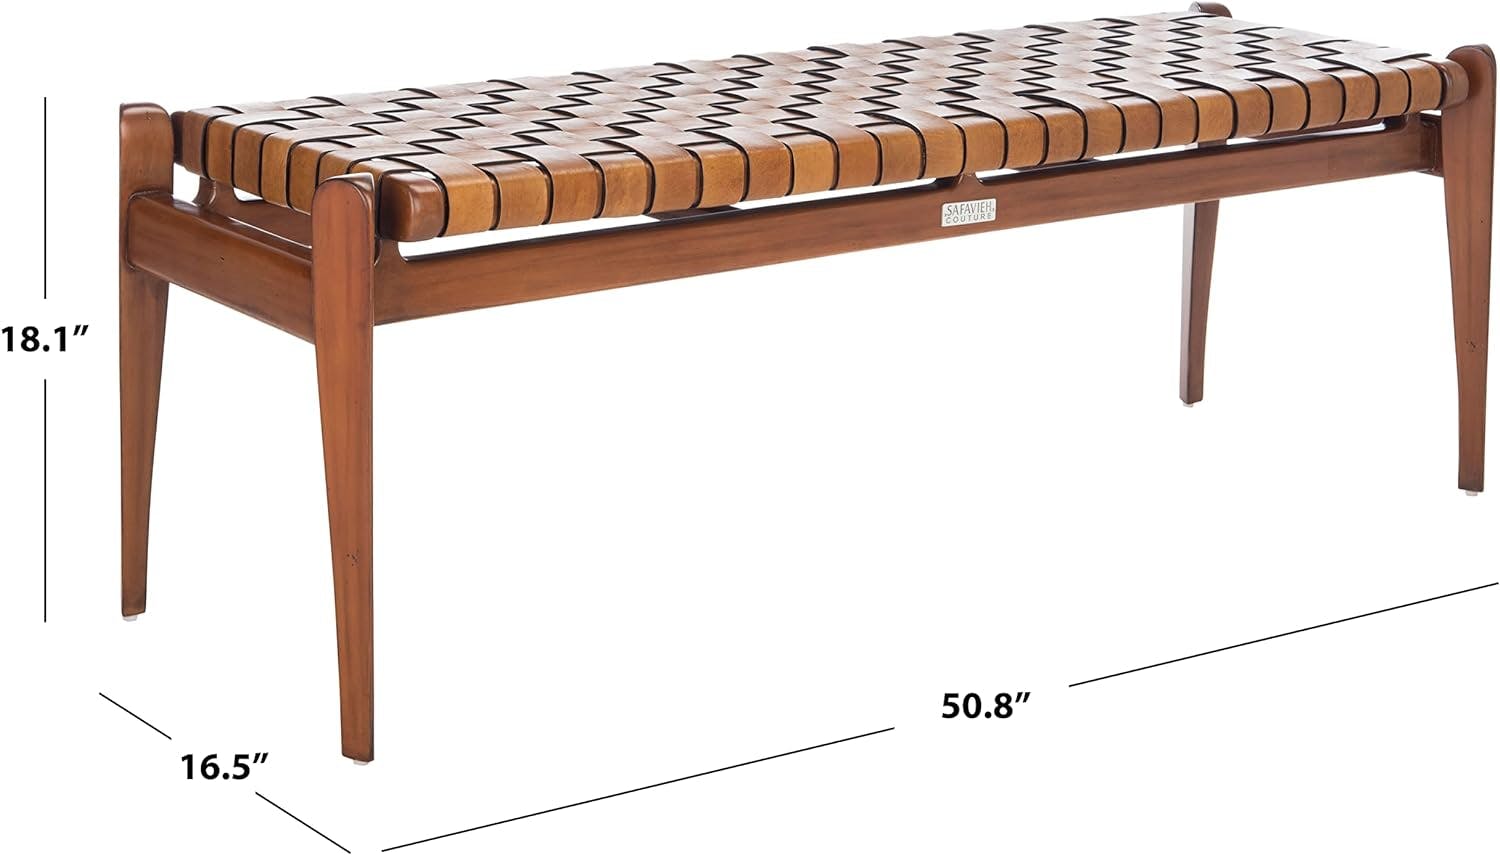 Dilan 48'' Mahogany Wood and Top Grade Leather Woven Bench - Brown